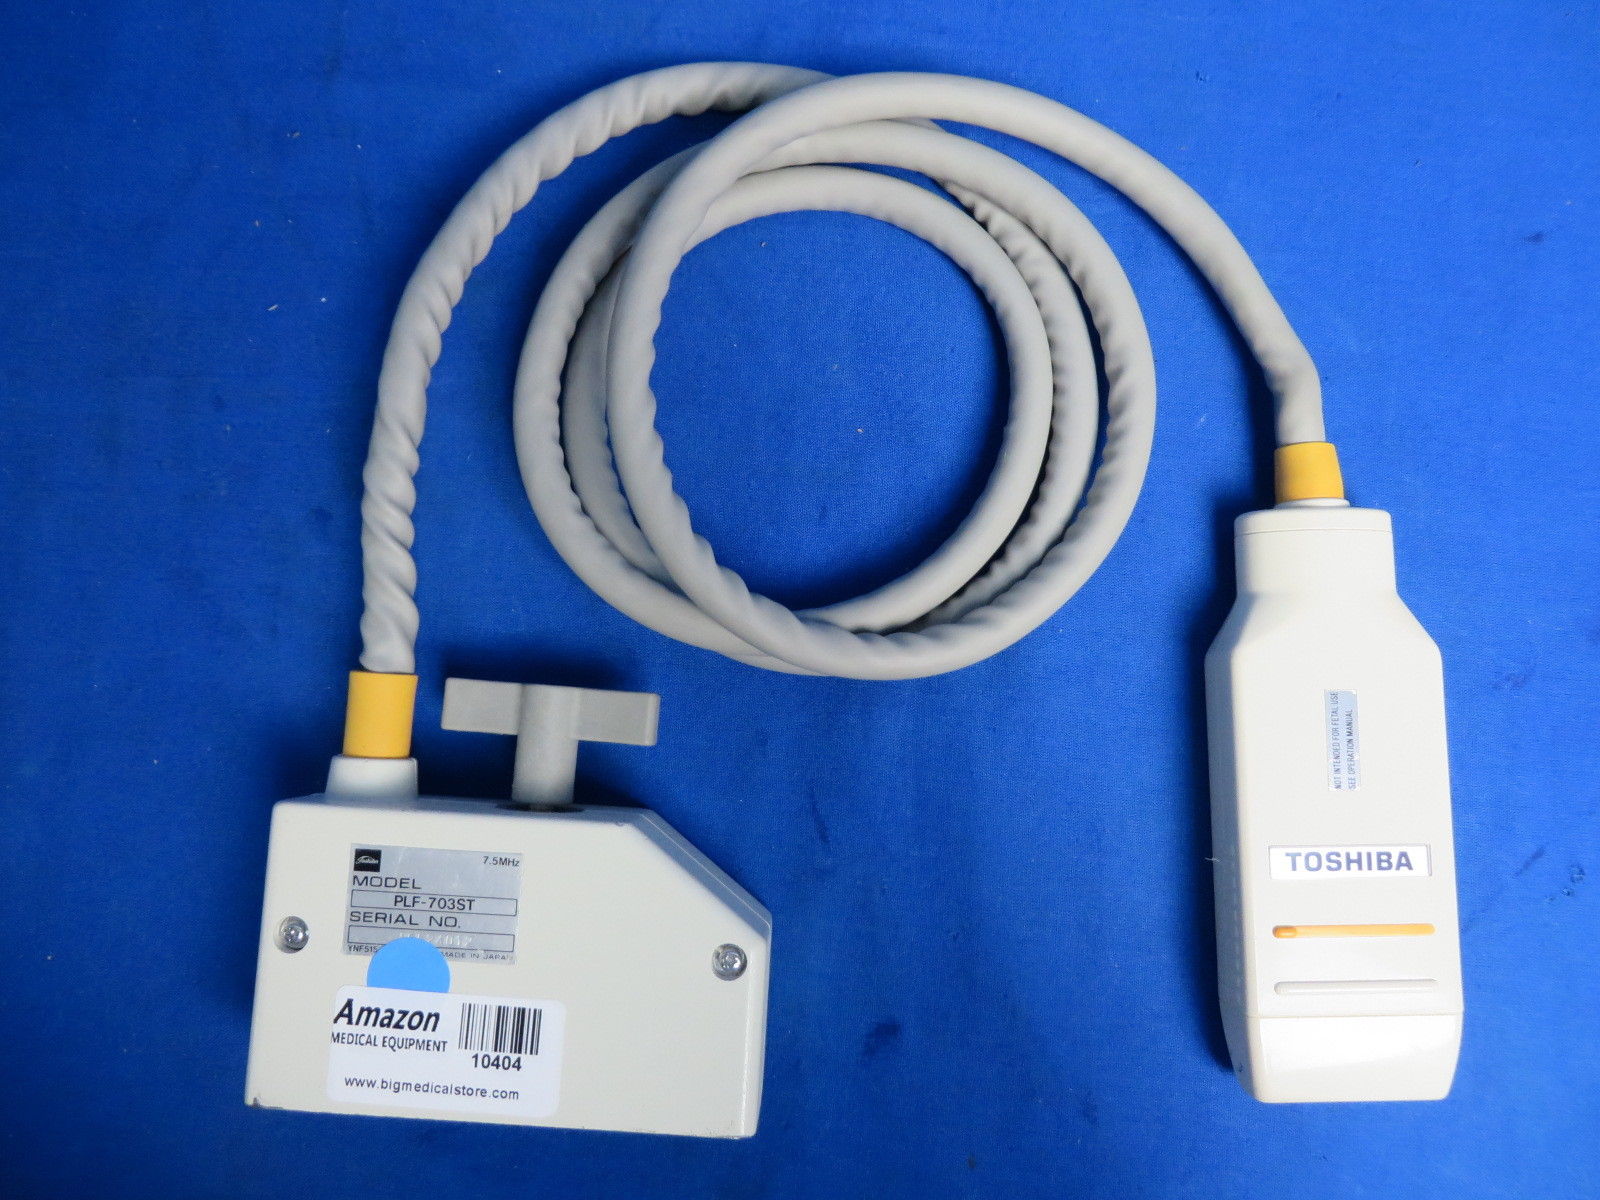 Toshiba PLF-703ST 7.5MHz Linear Array Ultrasound Transducer Probe for SSH-140A/1 DIAGNOSTIC ULTRASOUND MACHINES FOR SALE